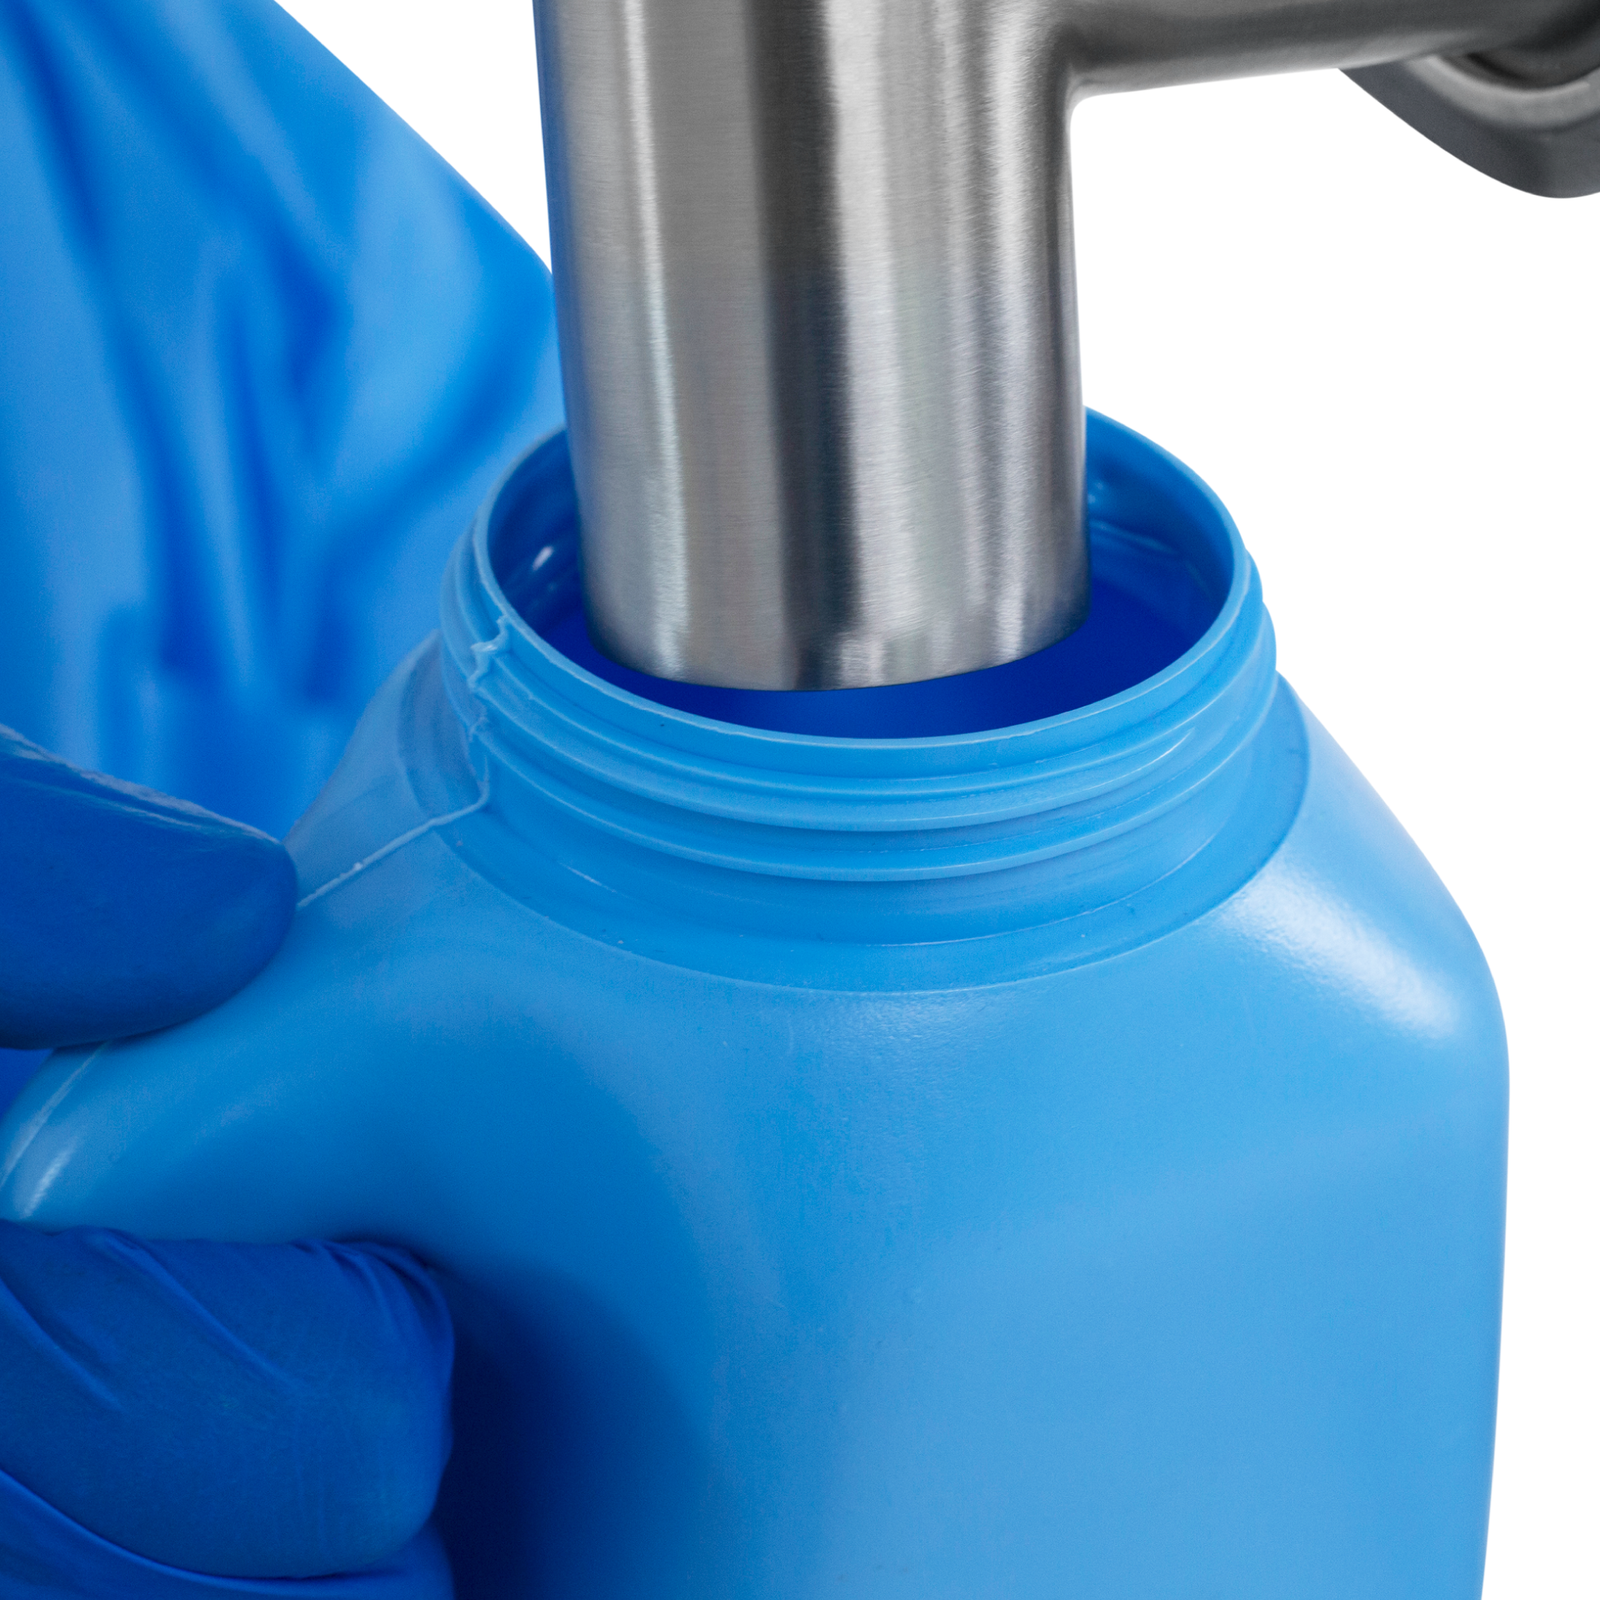 A worker wearing nitrile safety gloves operating the Jorestech Low Viscosity Piston Filler. The person is positioning a 5000ml bottle below the tip of the non-drip nozzle to be filled with accuracy by the liquid filling machine.